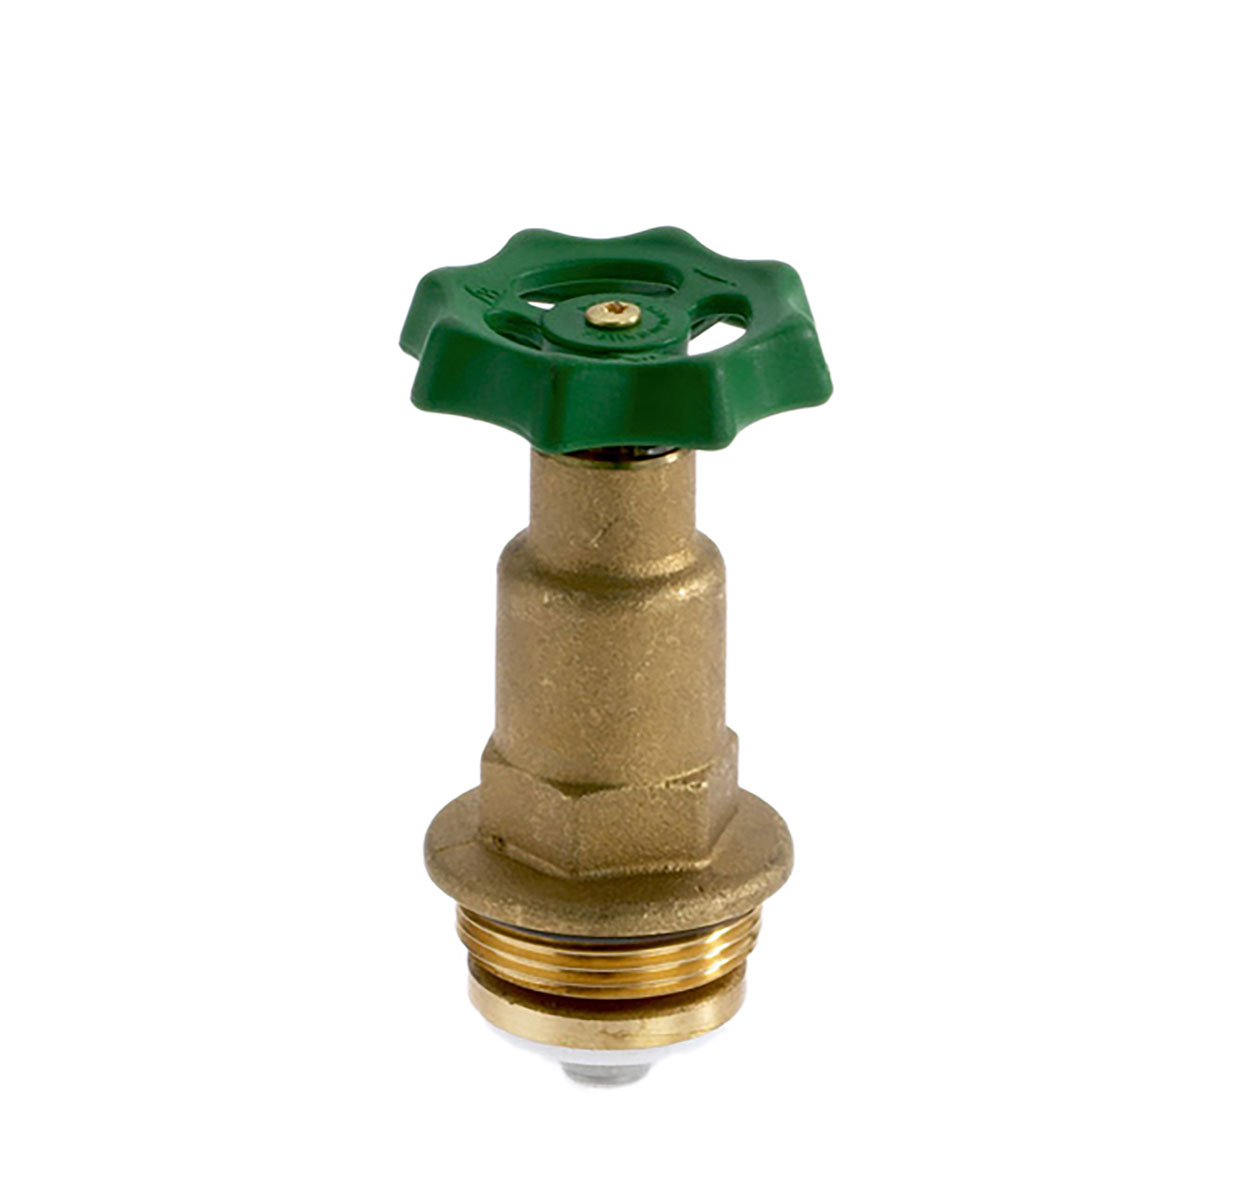 1227250 - Brass Upper-part with grease chamber with PTFE (Teflon) flat seal, for free-flow valves, non-rising spindle